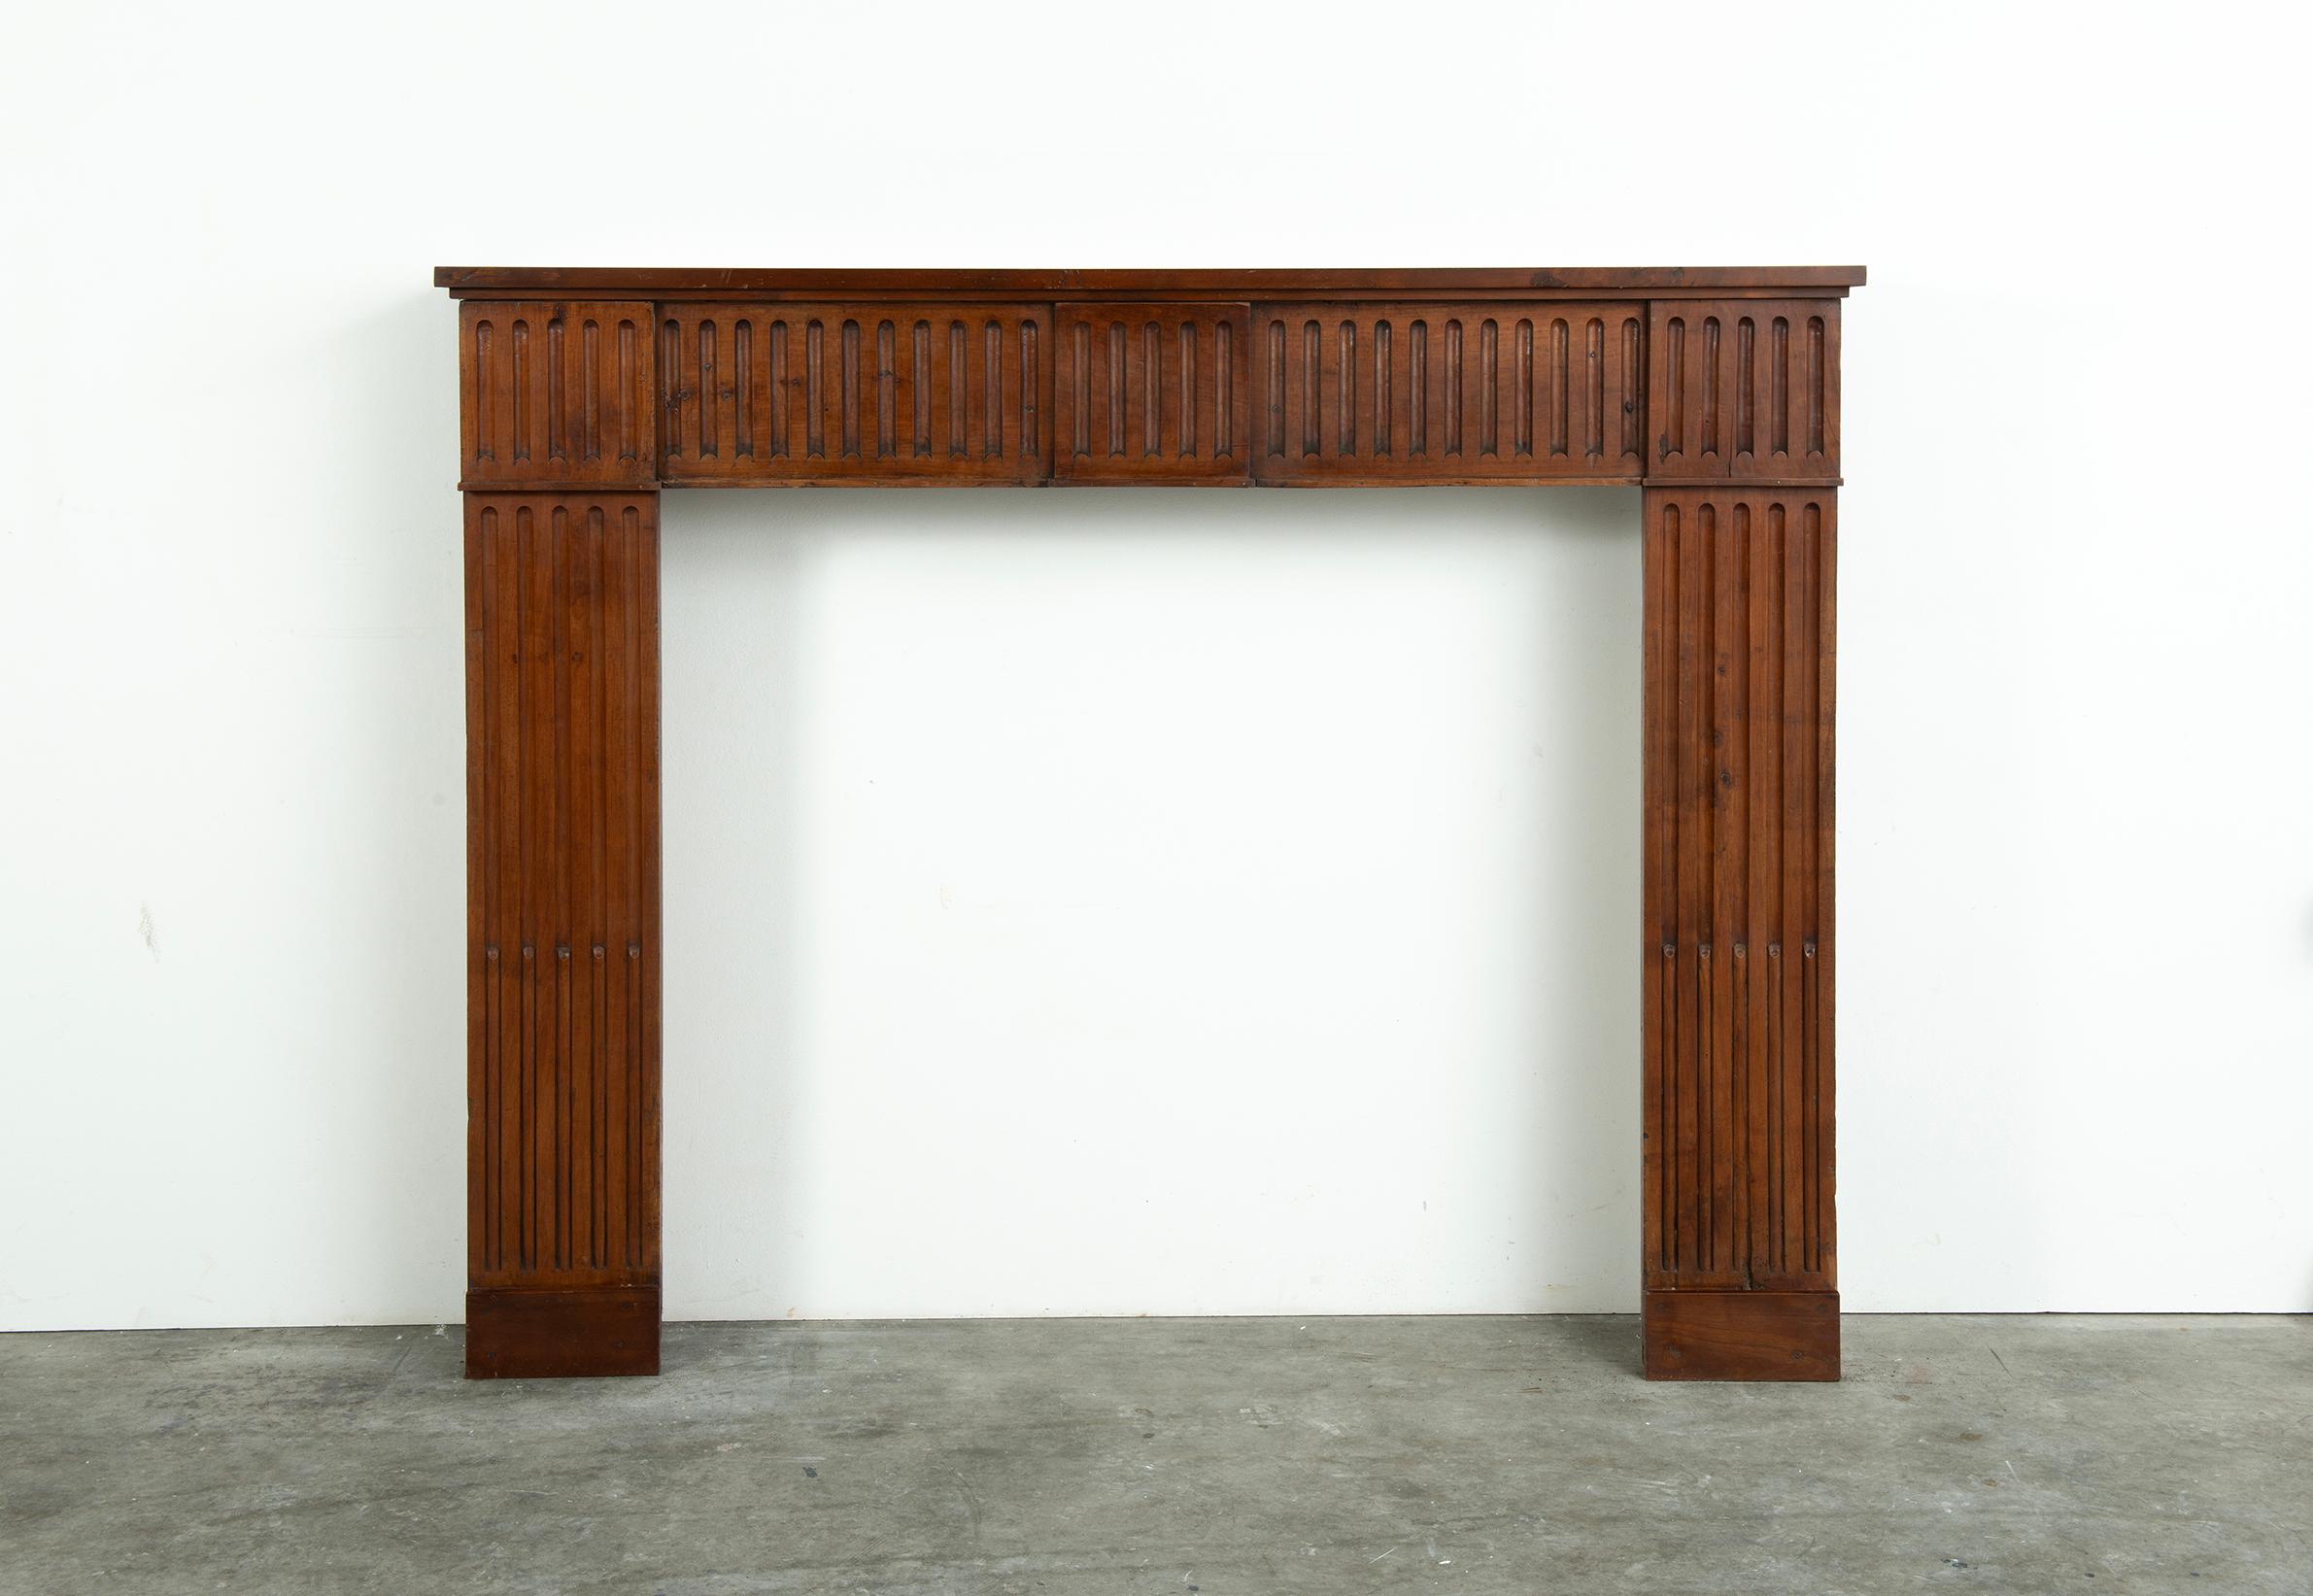 A very nice antique wooden fireplace mantel.

This lovely fluted antique mantel is build up in 4 parts, two legs, the frieze and the topshelf. It can easy be disassemble and shipped.

The endblocks appear to have been added on later.

The opening